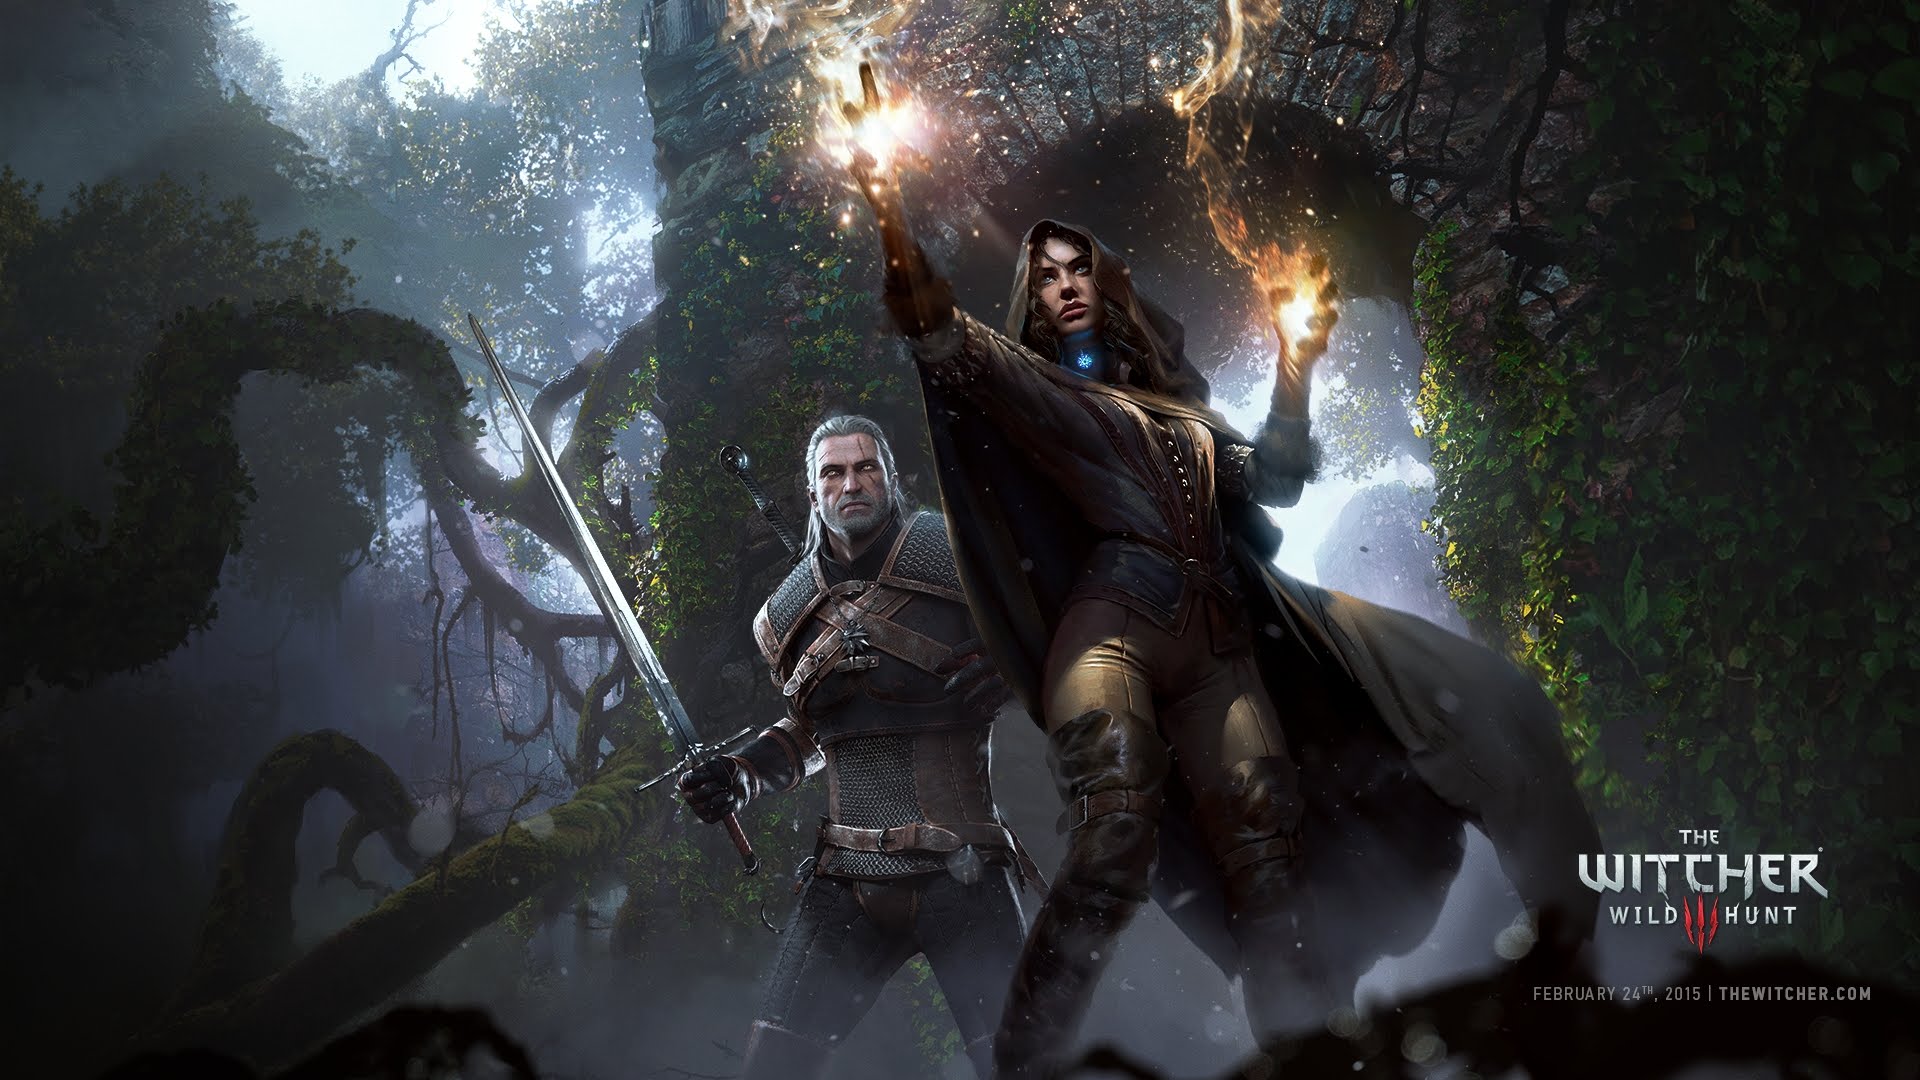 The Witcher 3 Wild Hunt Wallpaper Collection 1920 X 1080 - YouTube